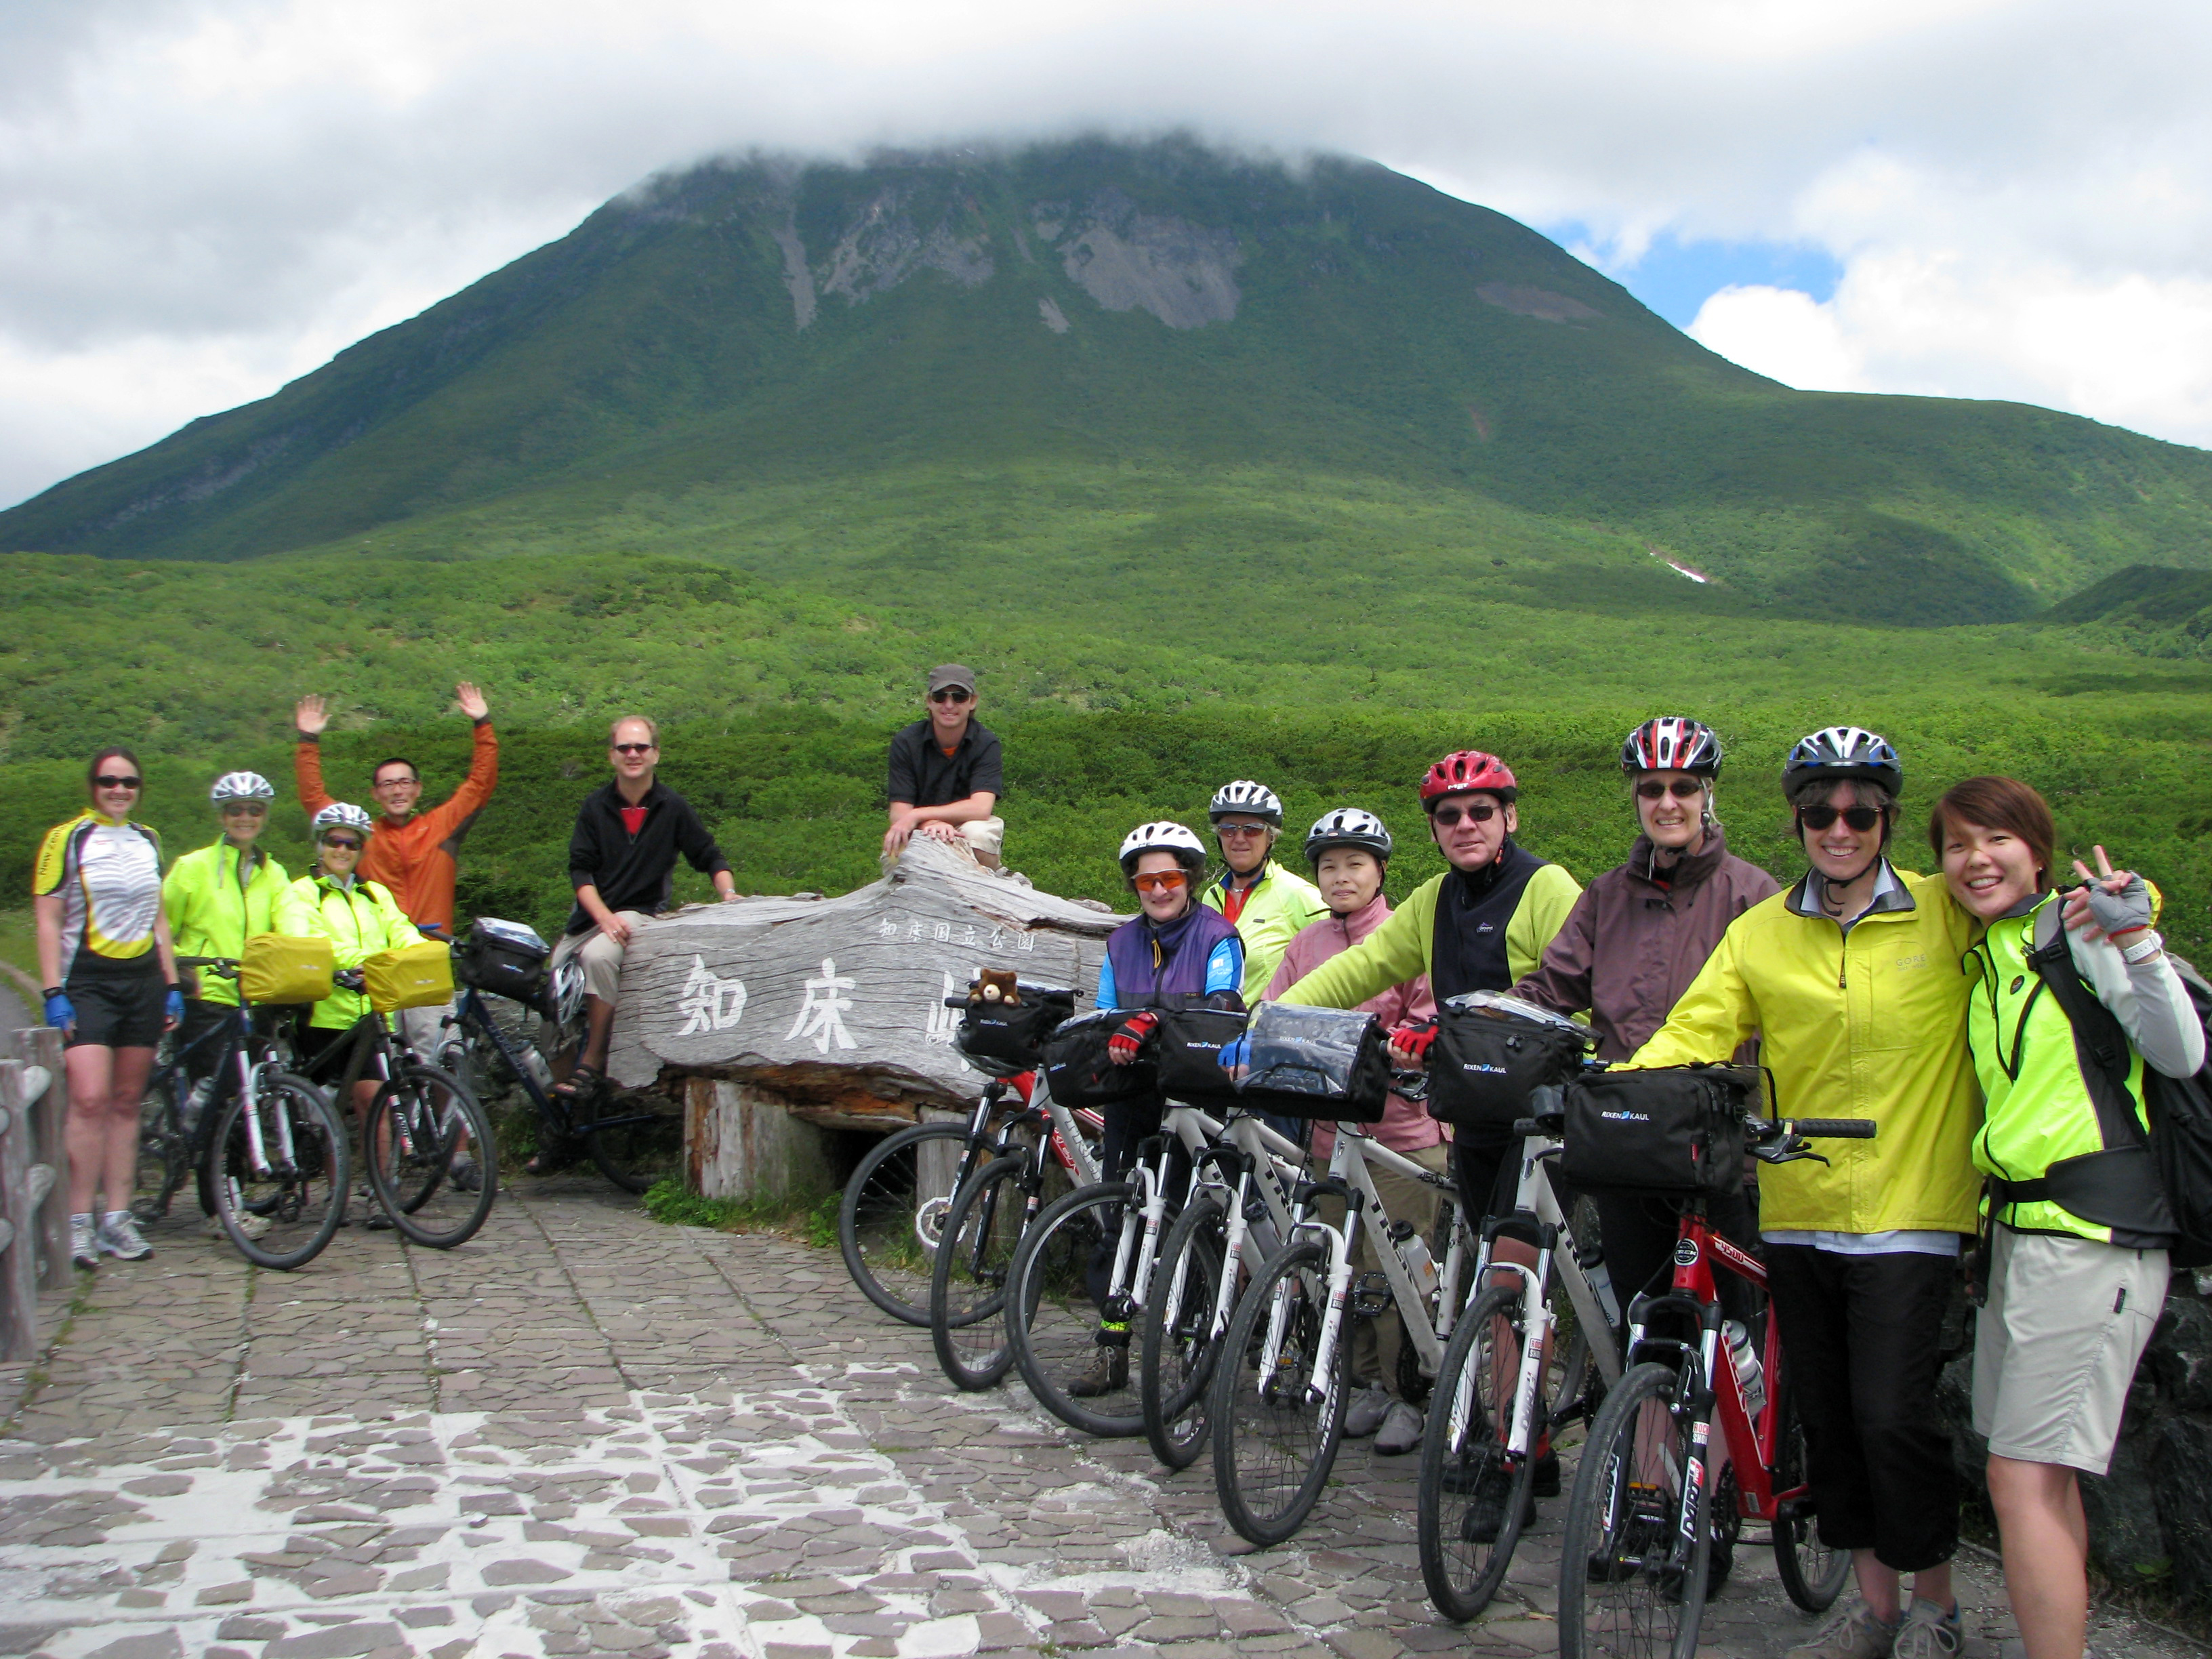 A group of happy cyclists pose at the base of Mt. Rausu